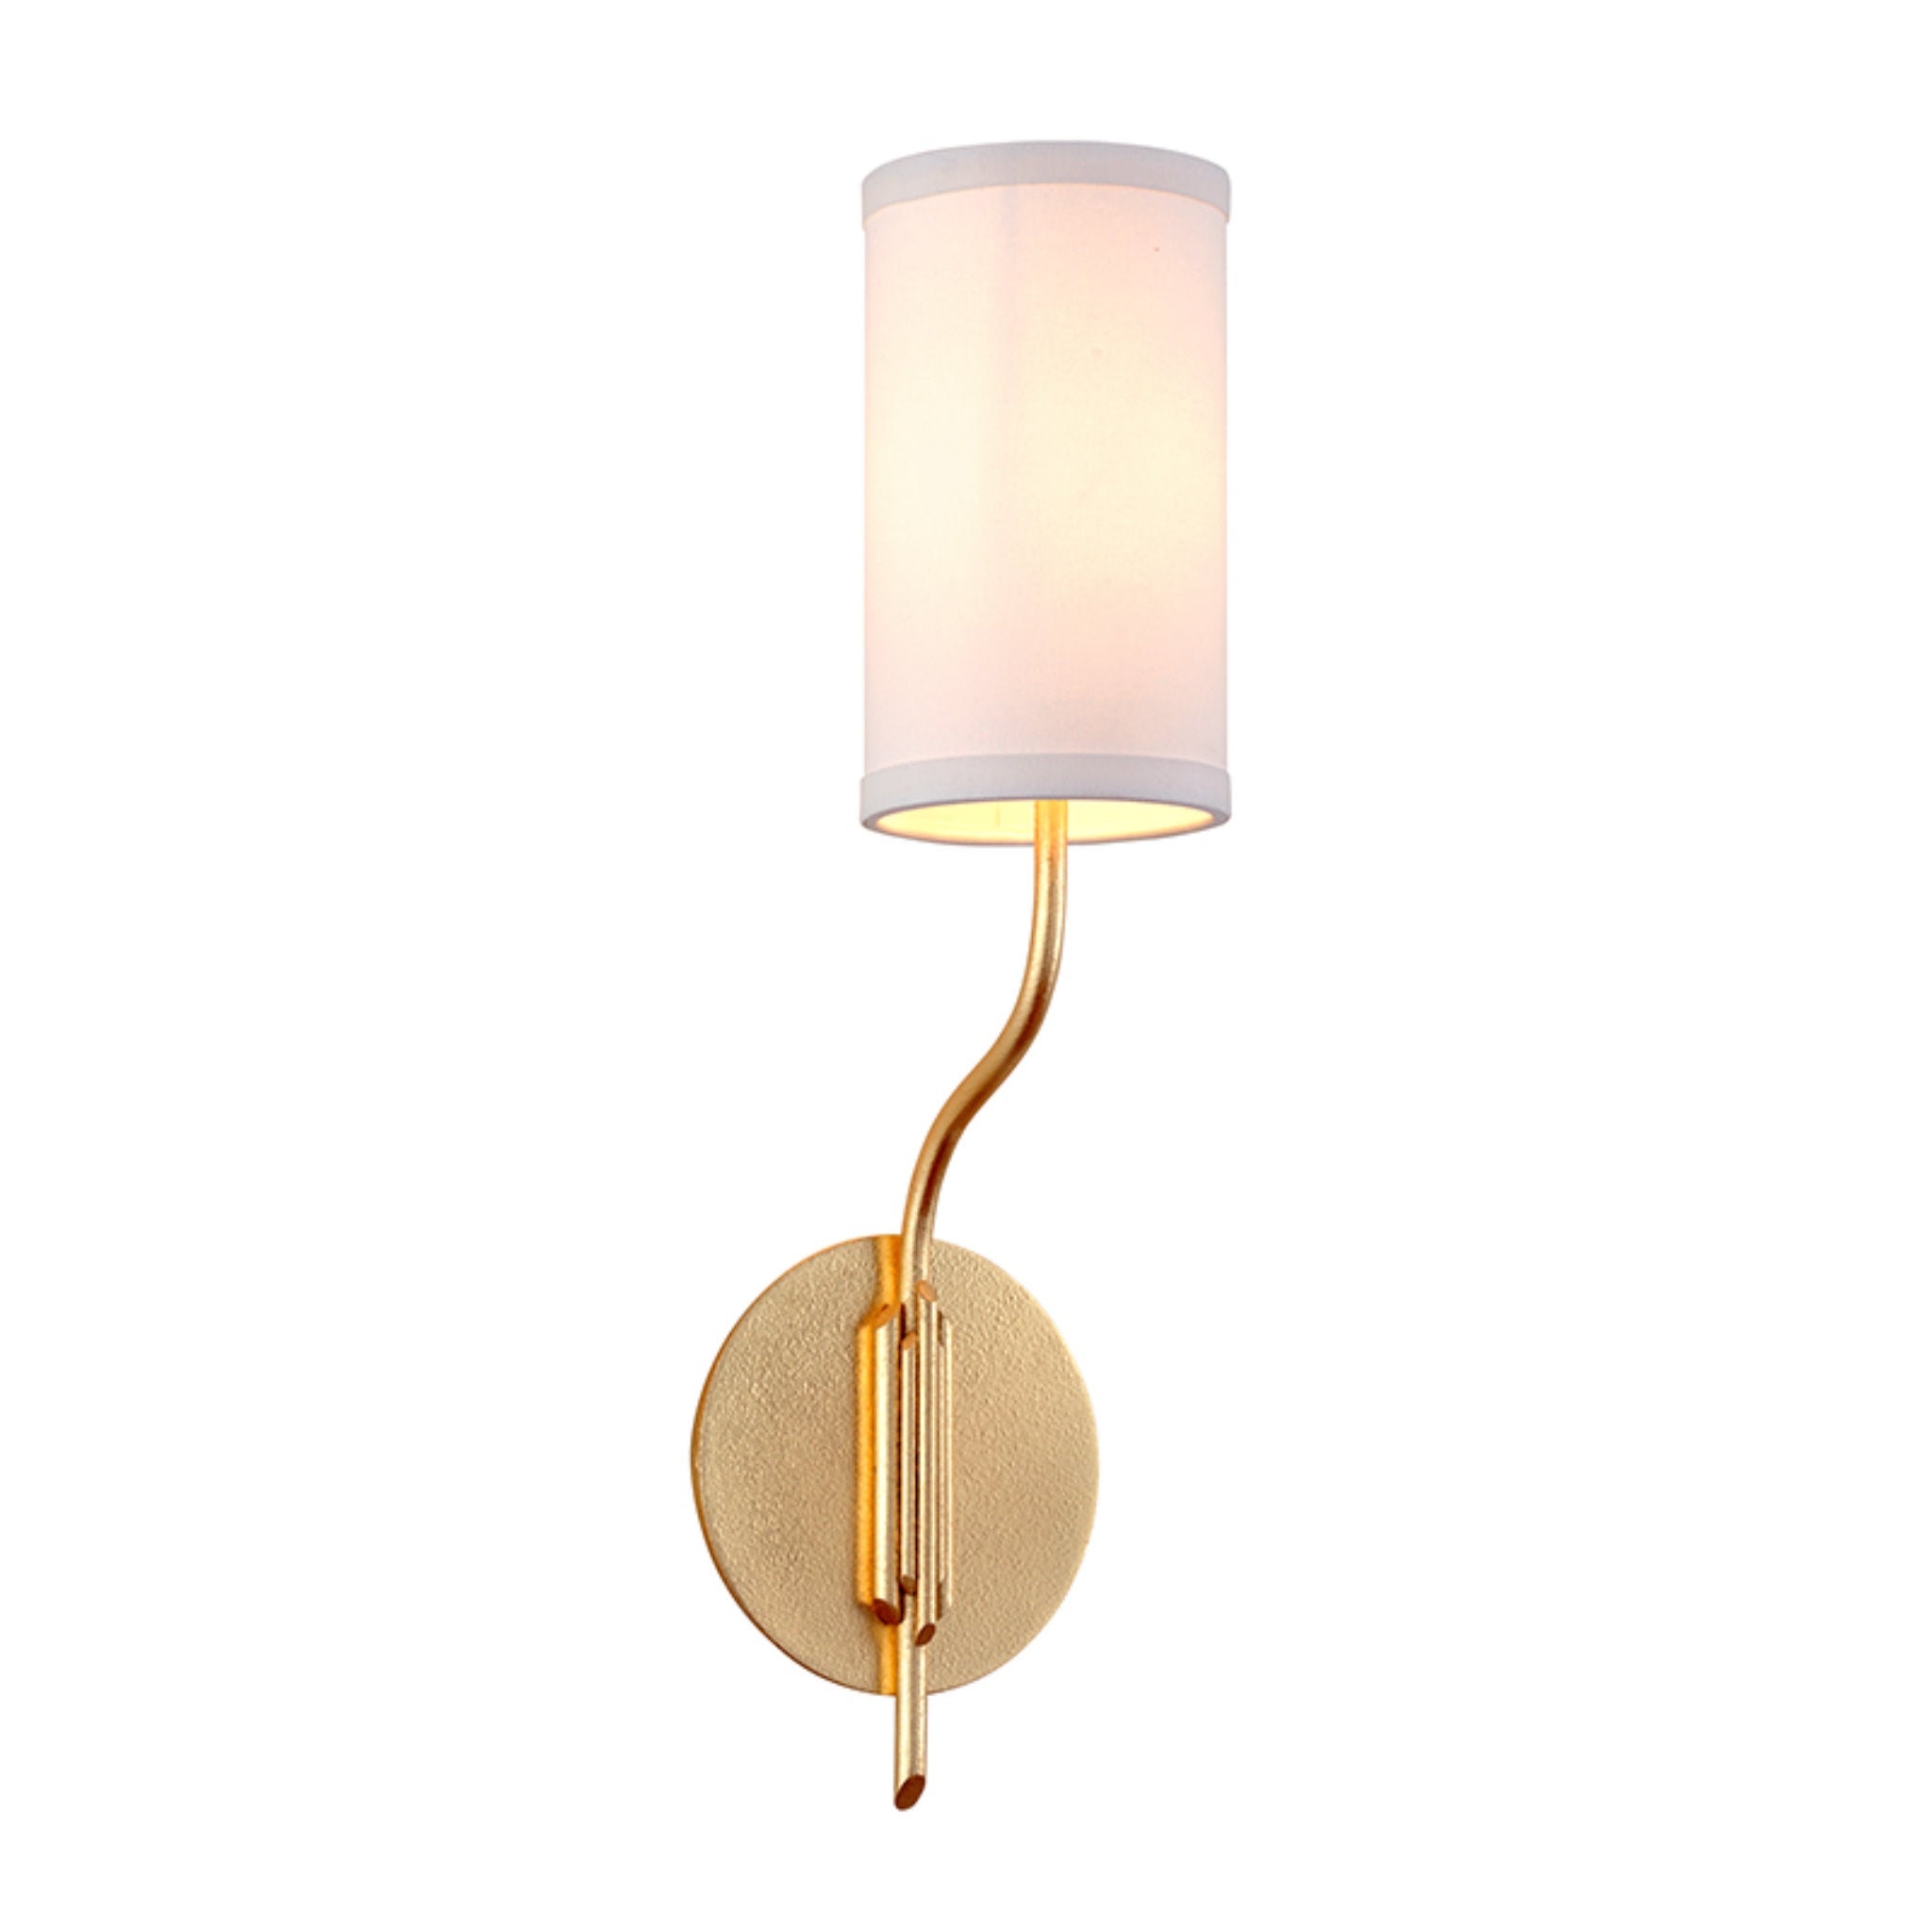 Juniper 1 Light Wall Sconce in Textured Gold Leaf